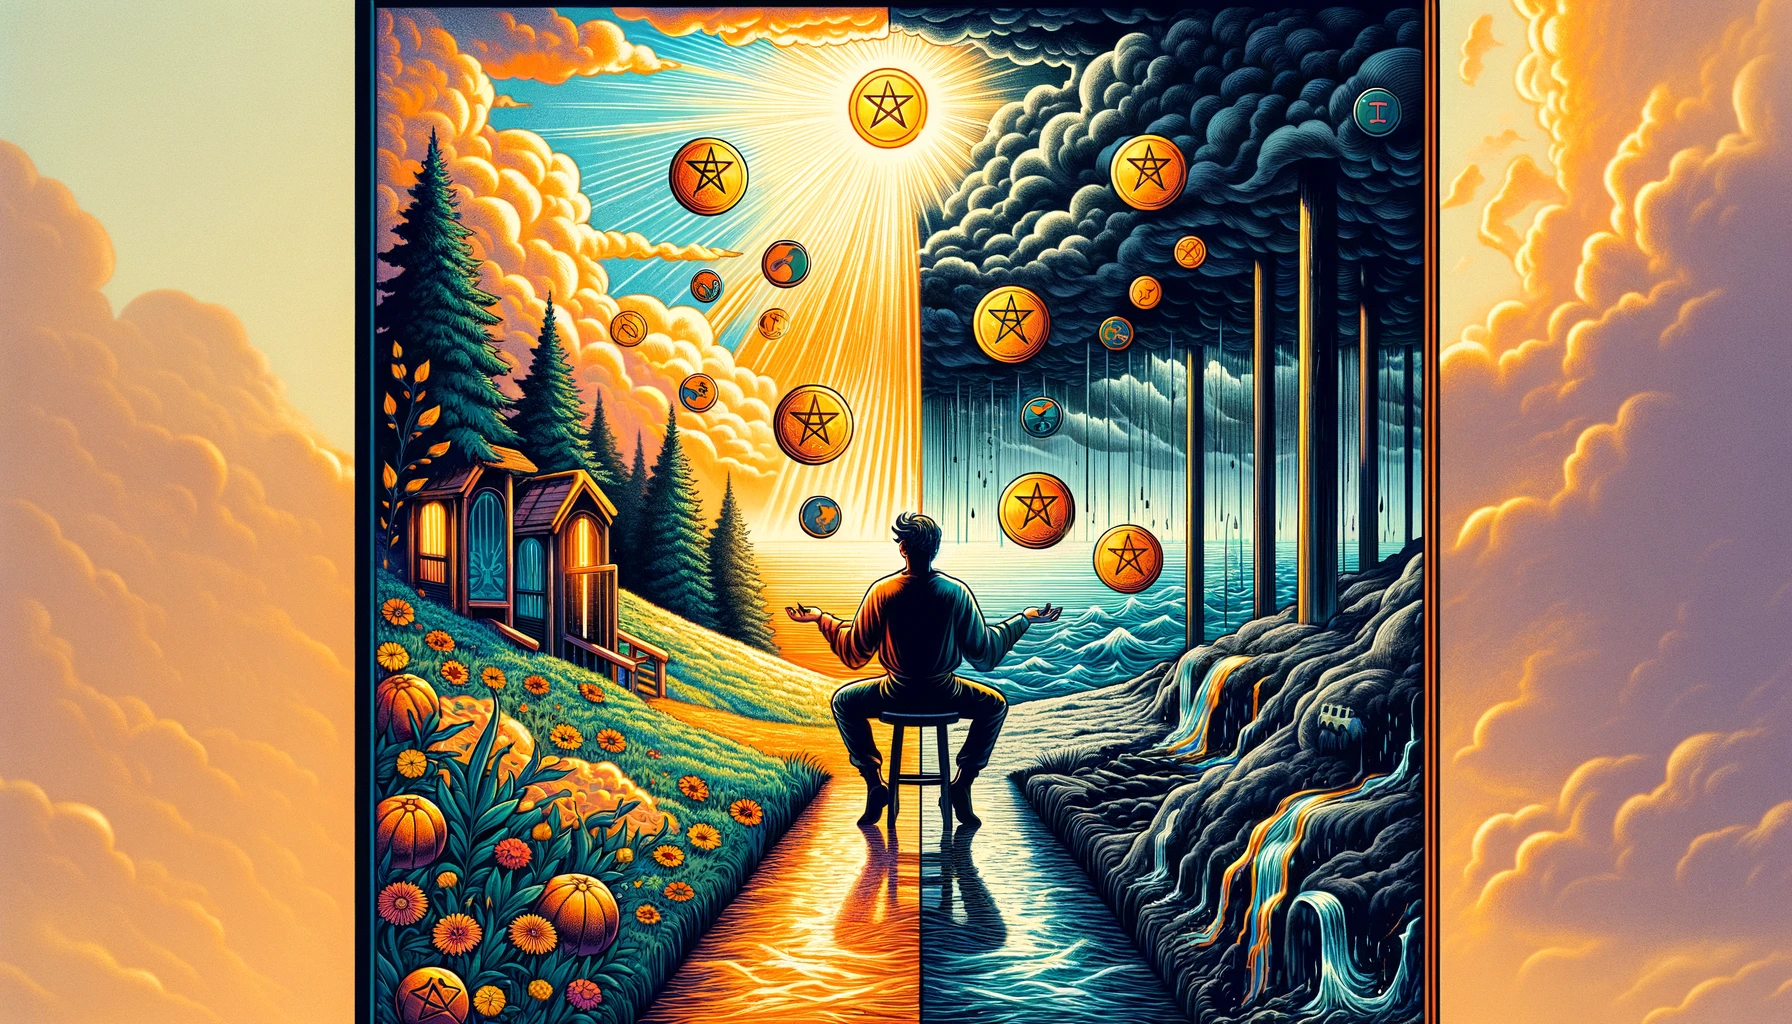 An illustration showcasing the dual nature of the card, with one side depicting a figure skillfully juggling pentacles in a sunny landscape symbolizing a "Yes" through balance and adaptability, while the other side shows a figure with fallen pentacles in a stormy setting indicating a "No" due to imbalance and indecision. This visual emphasizes the significance of effective responsibility management in determining the outcome.